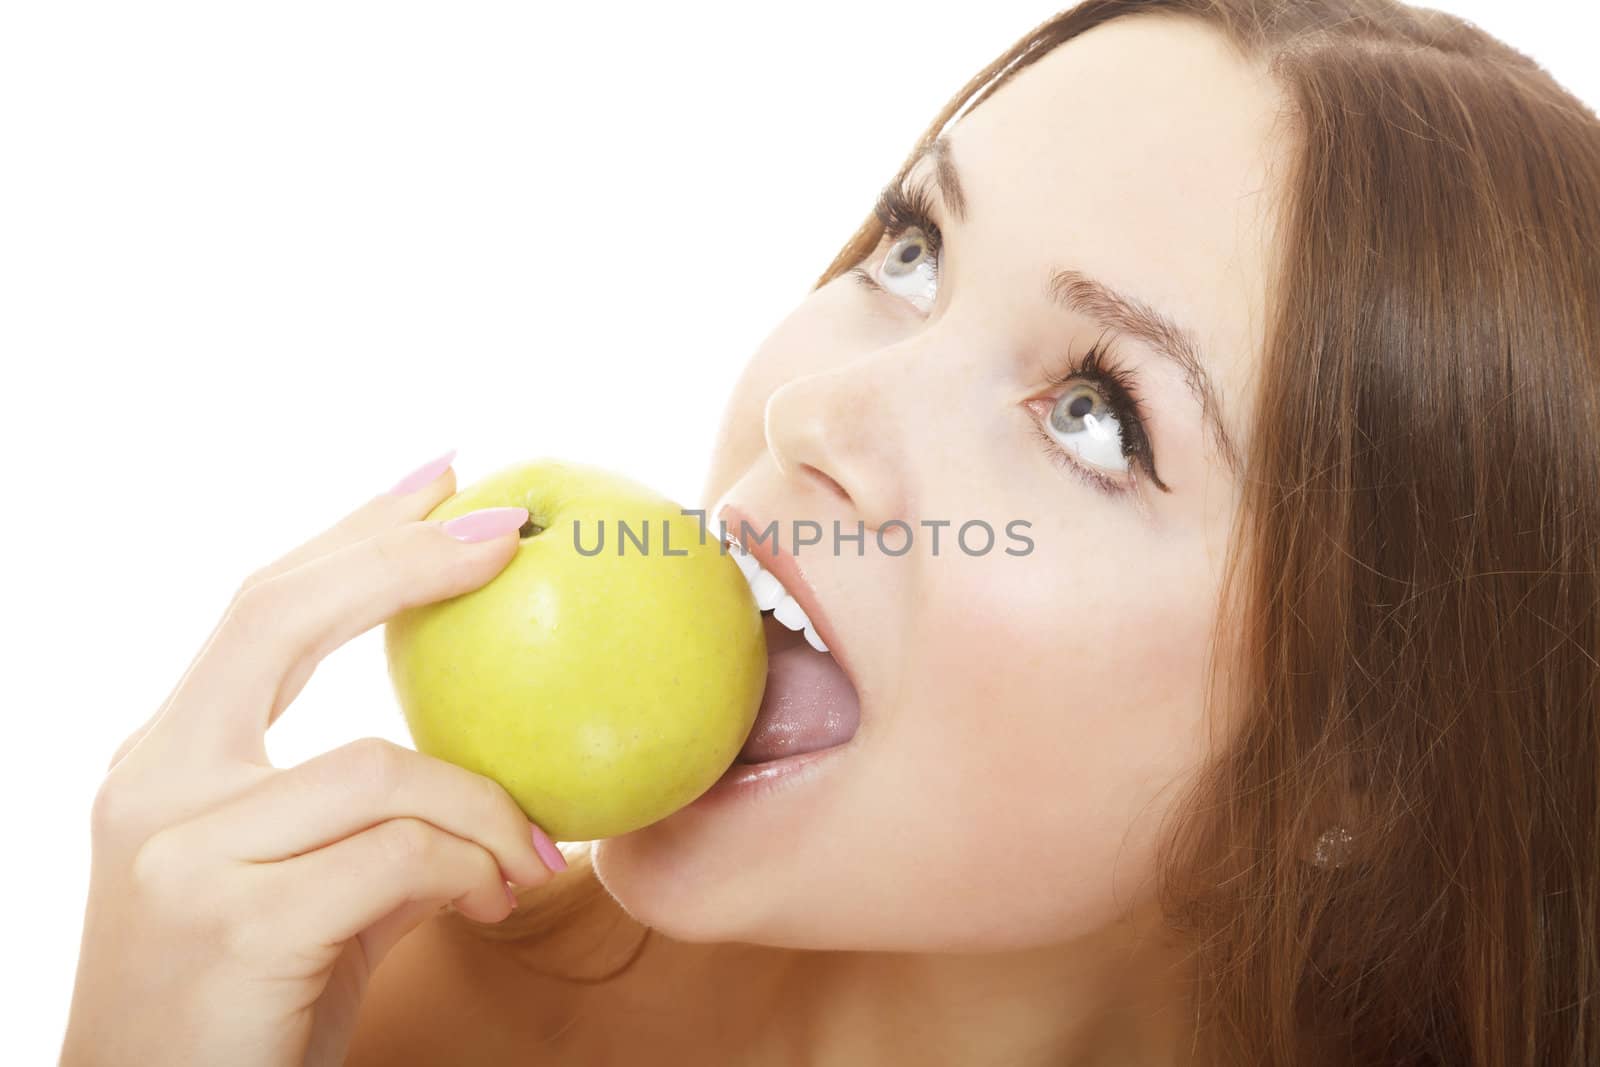 Pretty girl with open mouth eating green ripe apple, isolated over white background